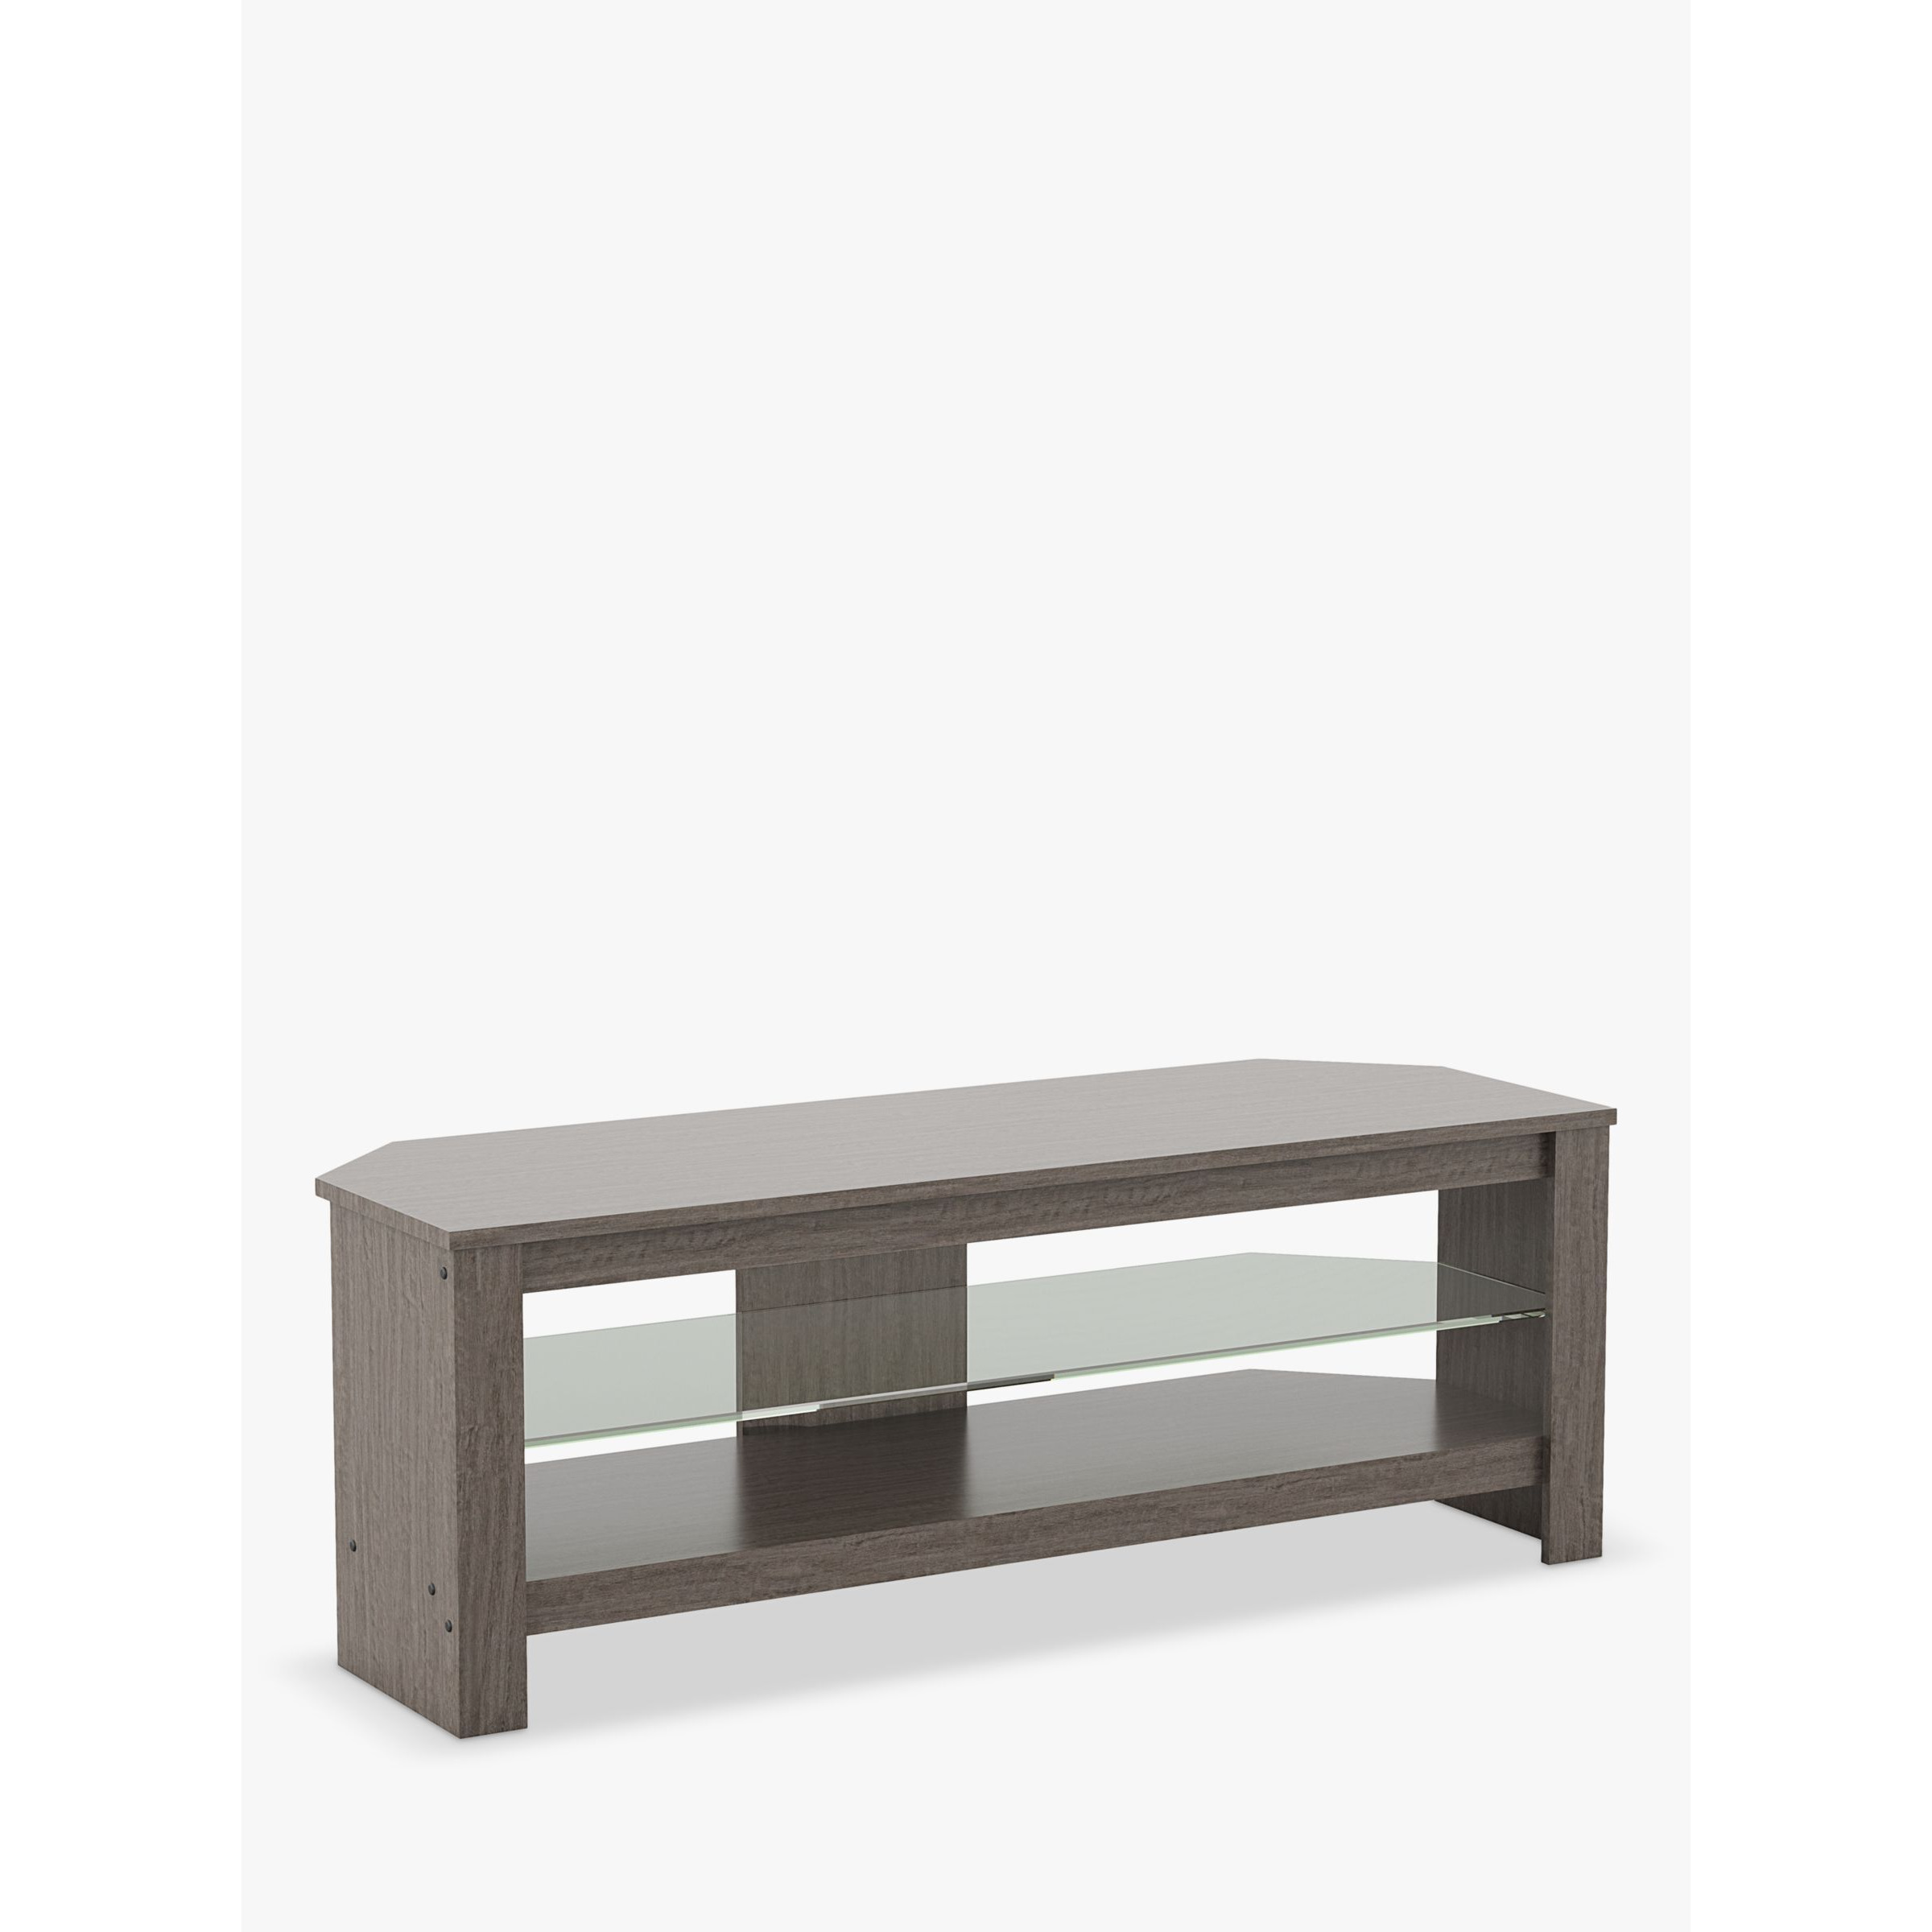 "AVF Calibre 115 Plus TV Stand for TVs up to 55"", Grey & Glass" - image 1